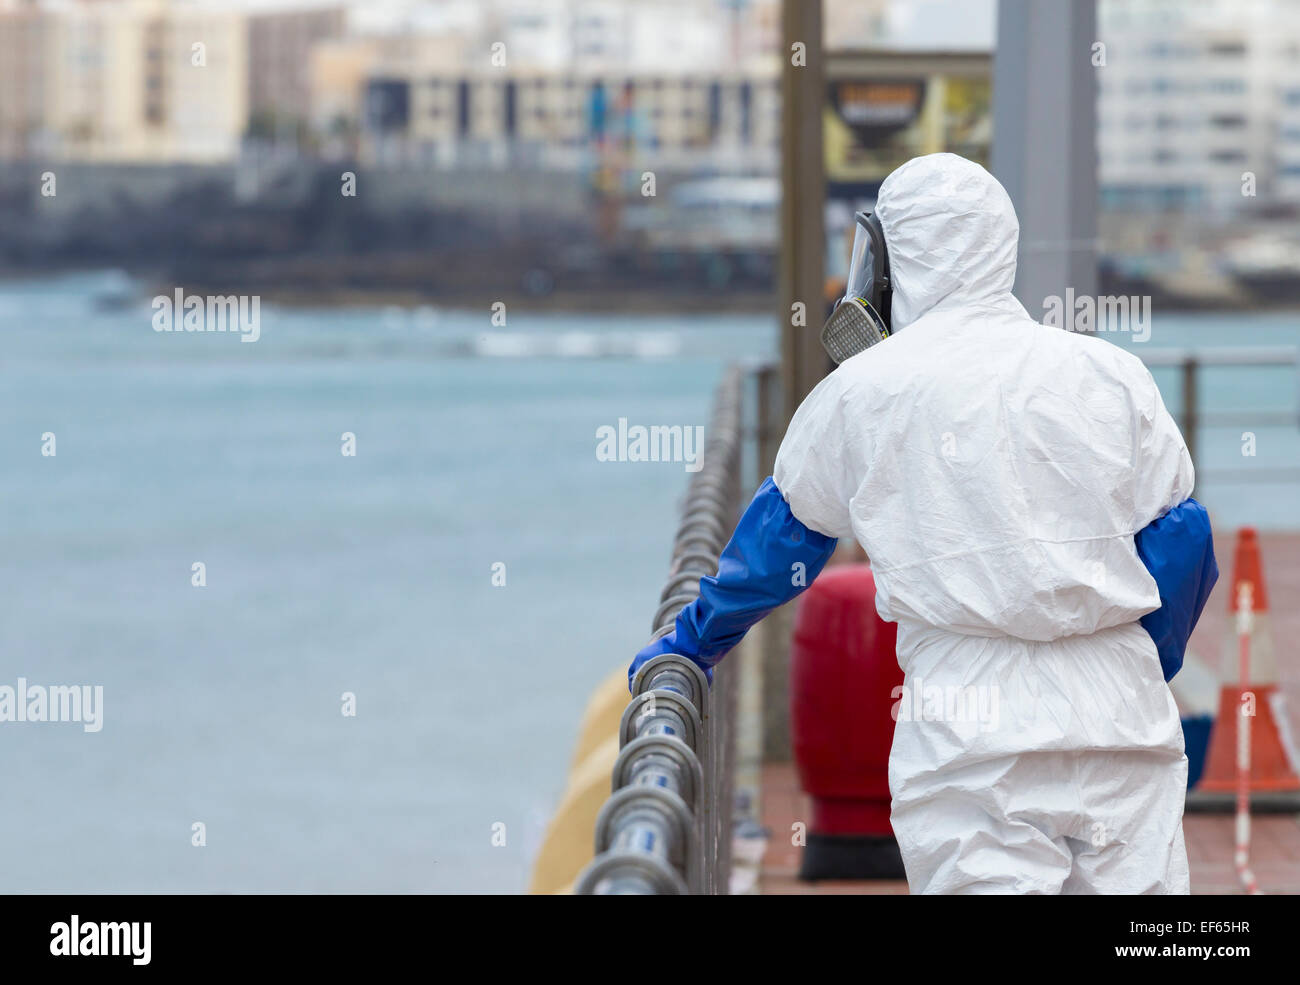 Council worker in protective suit and mask using chemical product to clean Stainless steel railings overlooking beach in Spain Stock Photo